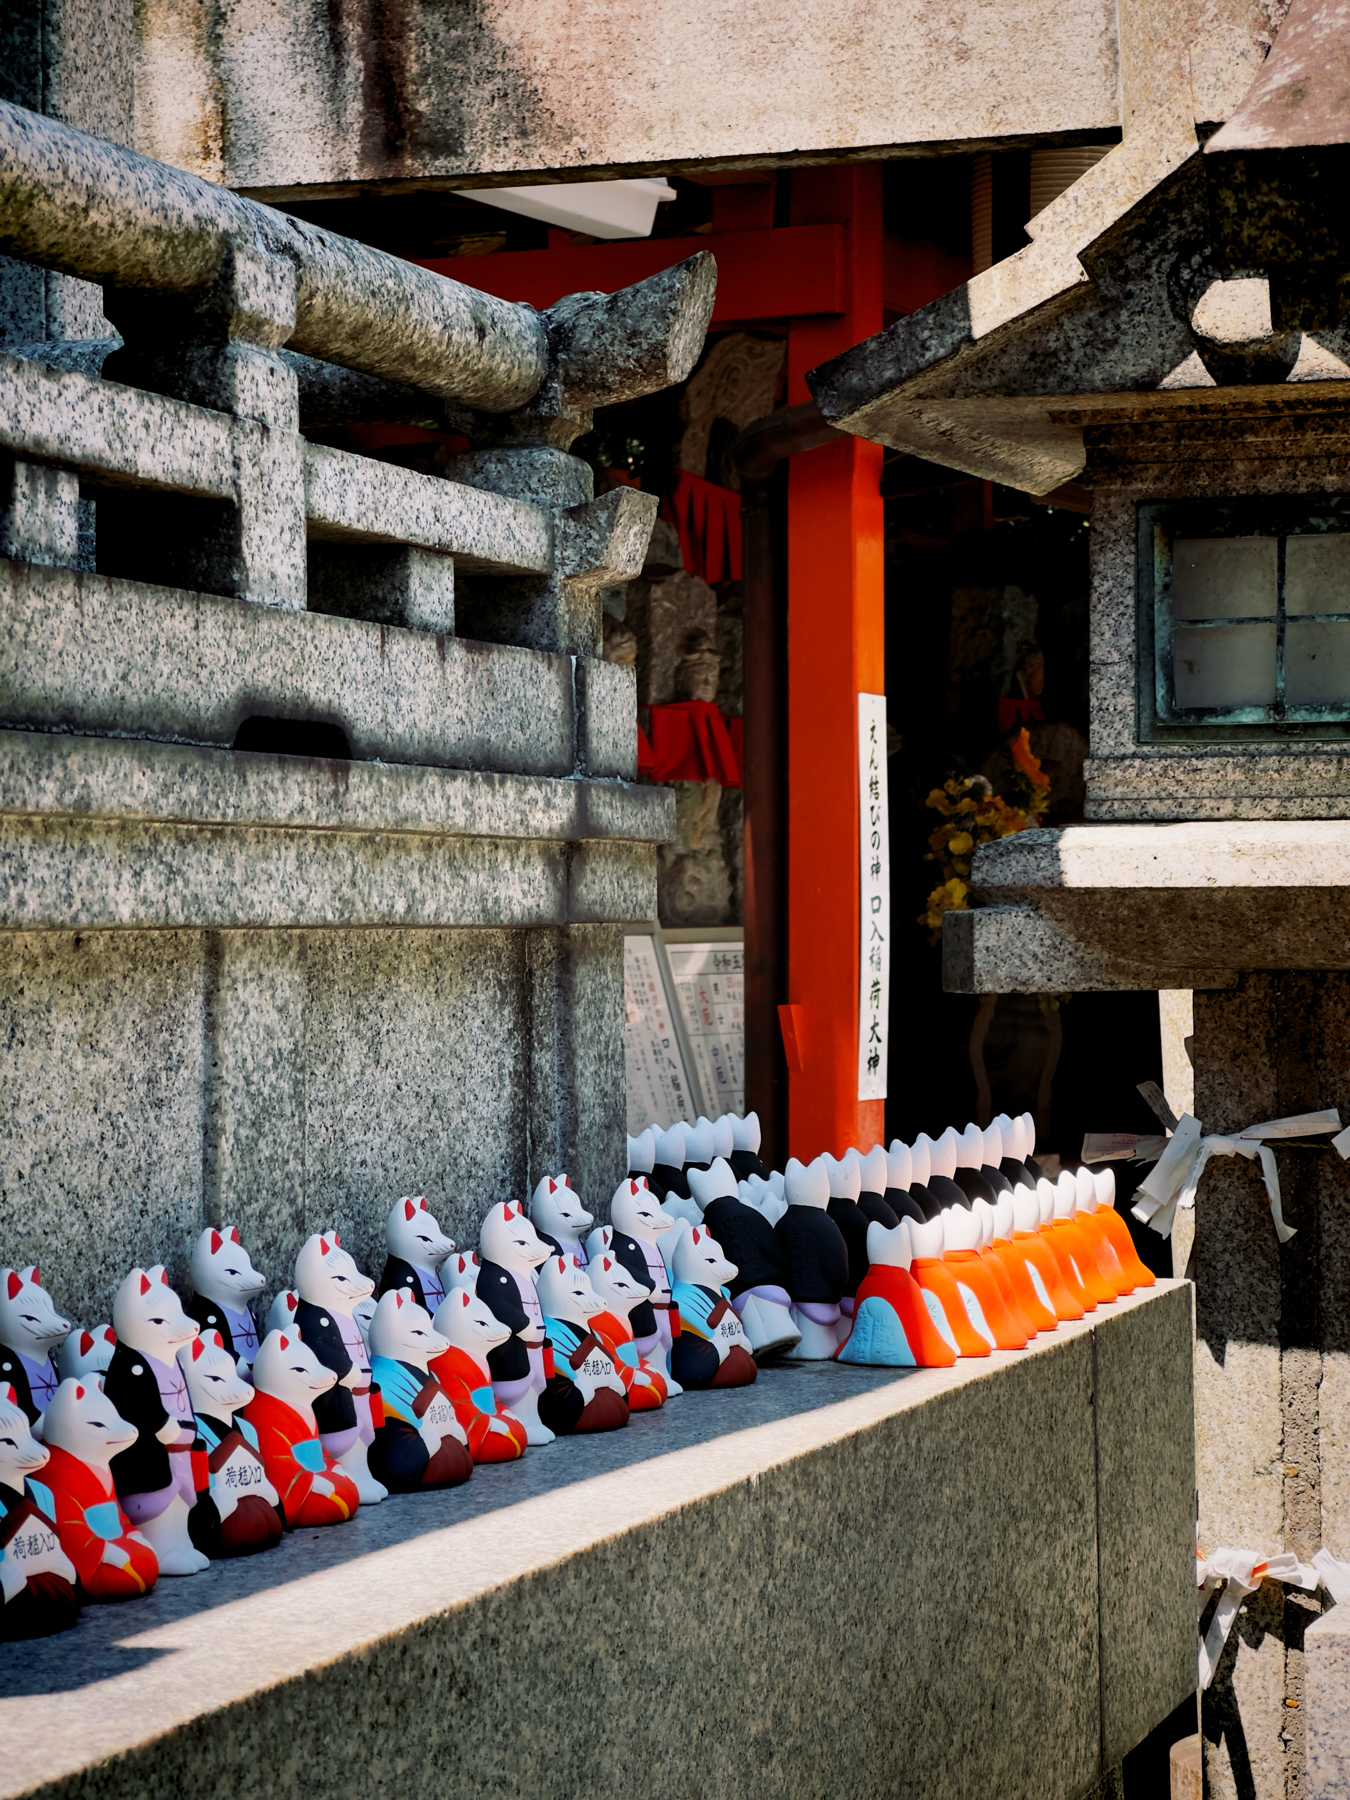 A collection of traditional Japanese fox statues known as &ldquo;Inari,&rdquo; in various colors, lined up at a Shinto shrine, with a torii gate and stone lantern visible in the background.